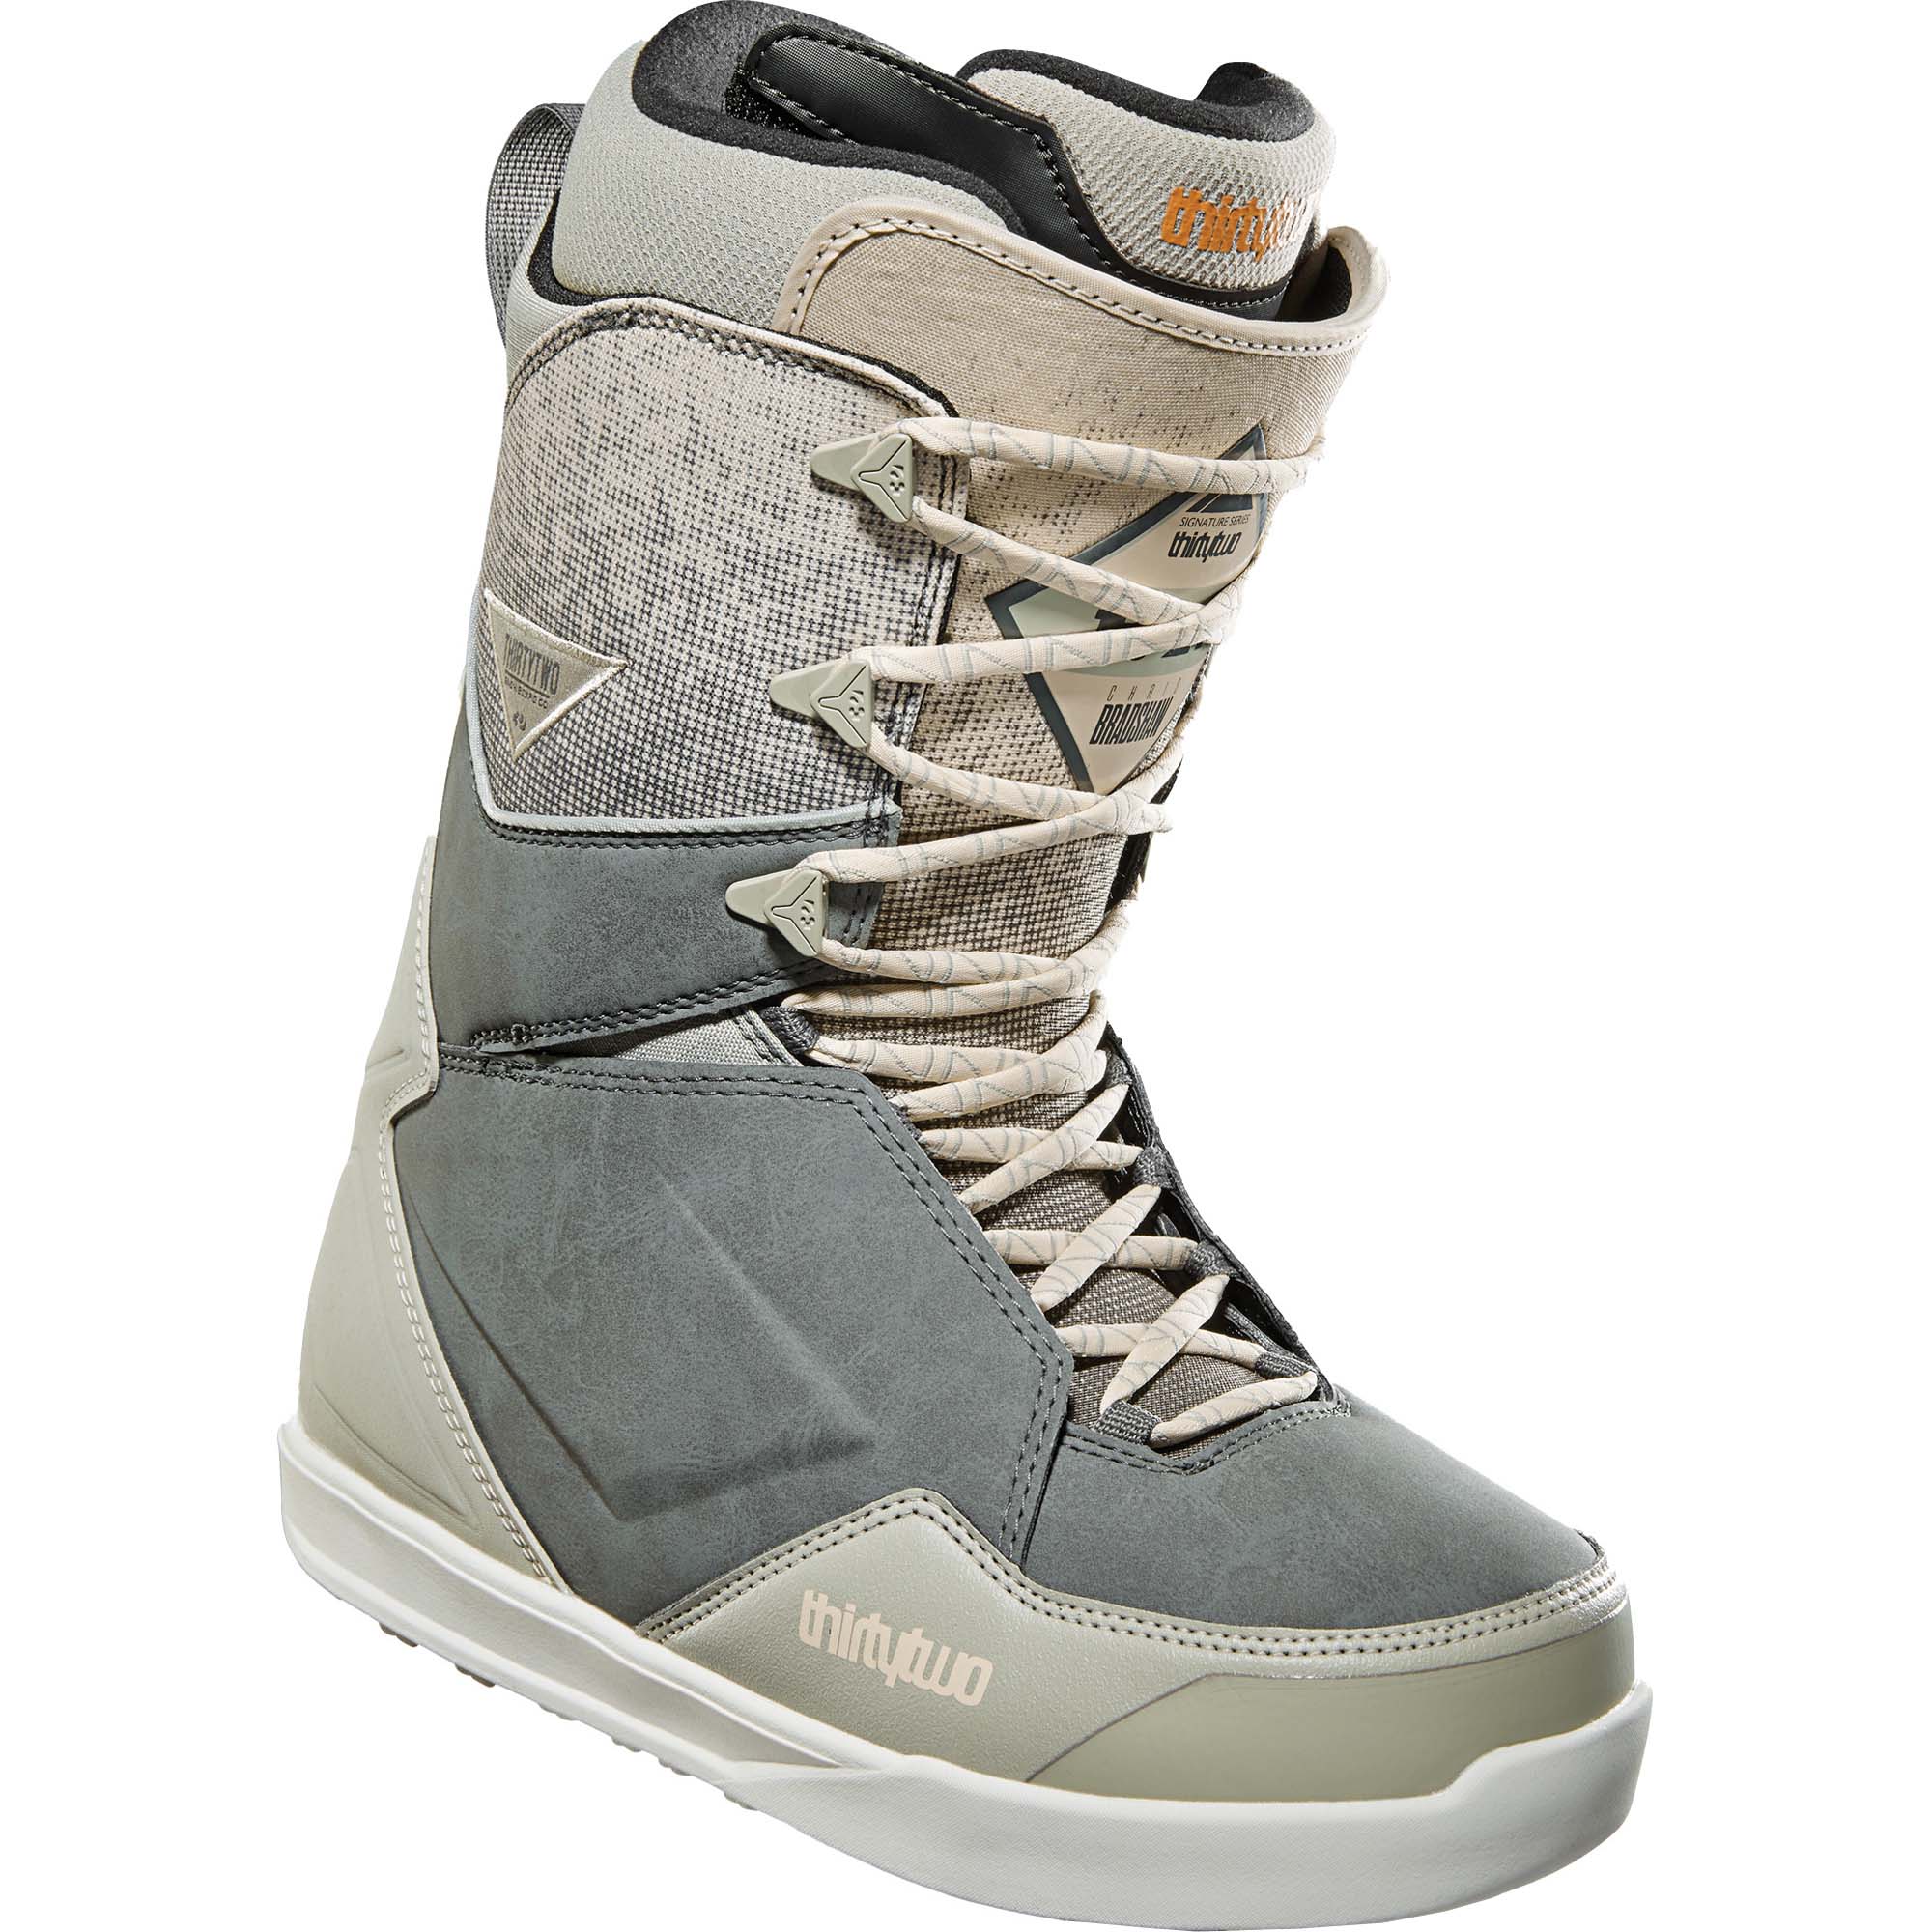 thirtytwo Lashed Men's Snowboard Boots